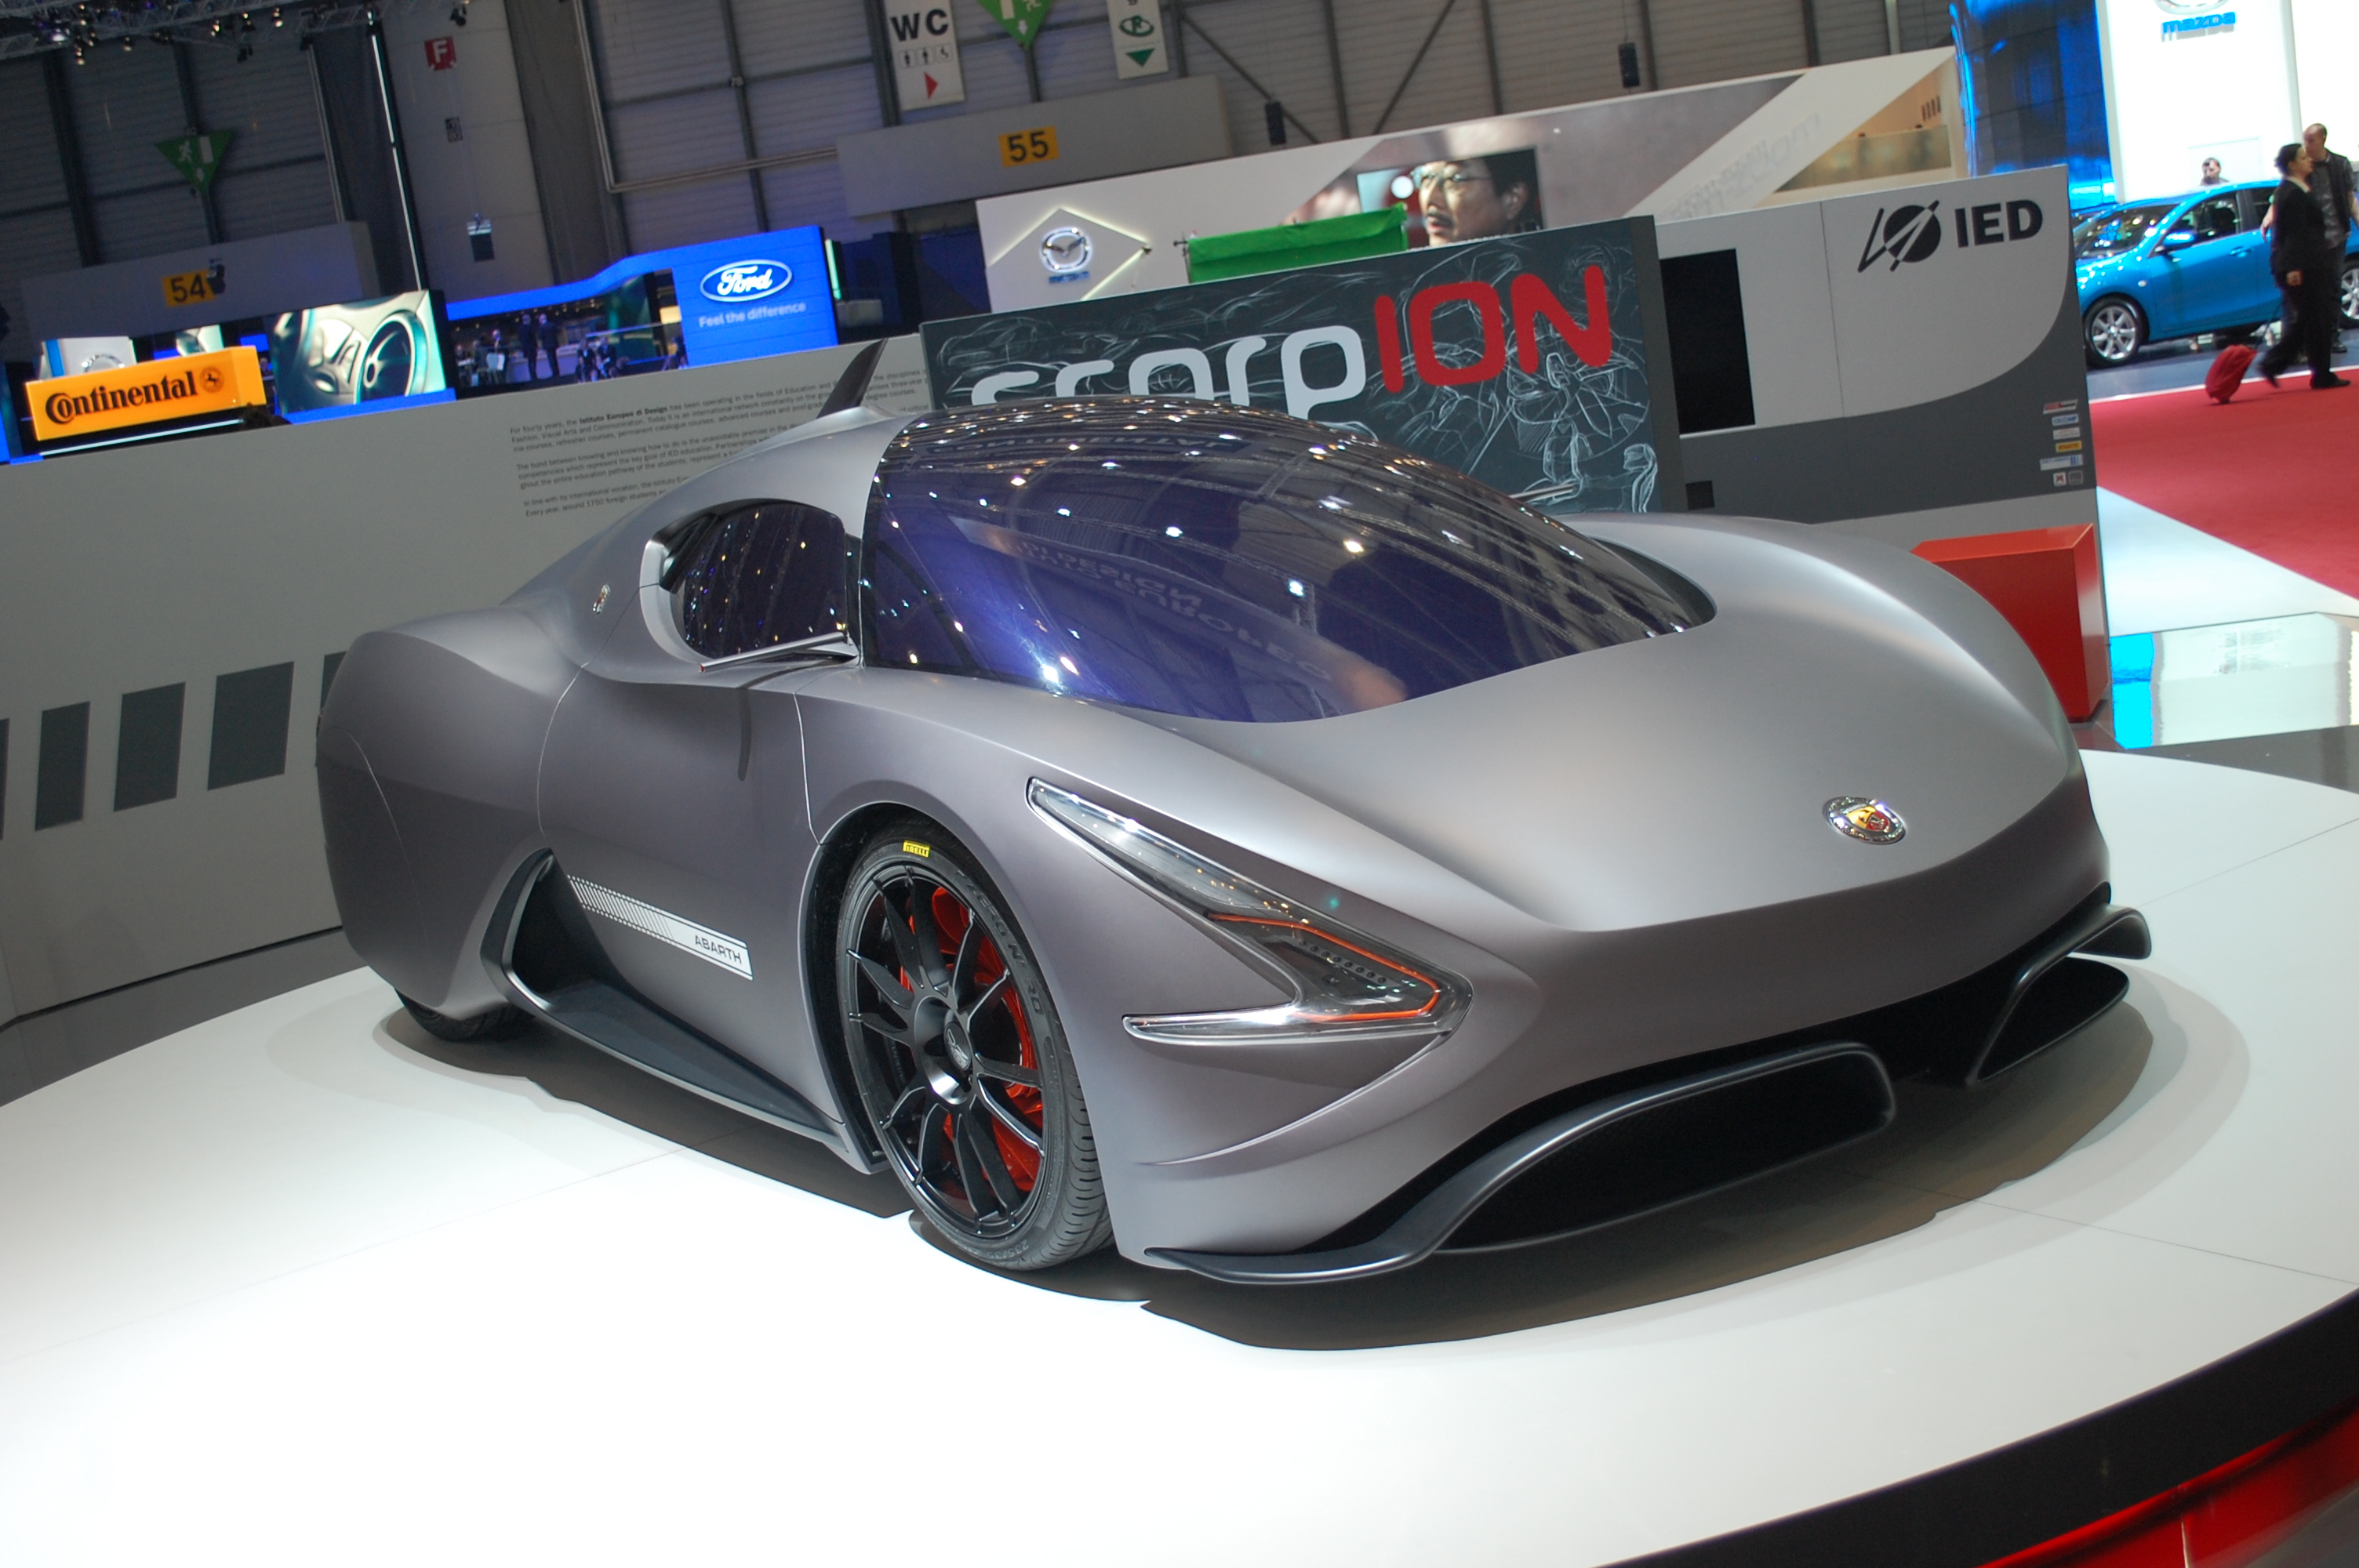 Airco Toegeven vod Abarth ScorpION: The Electric Car With A Sting In Its Tail